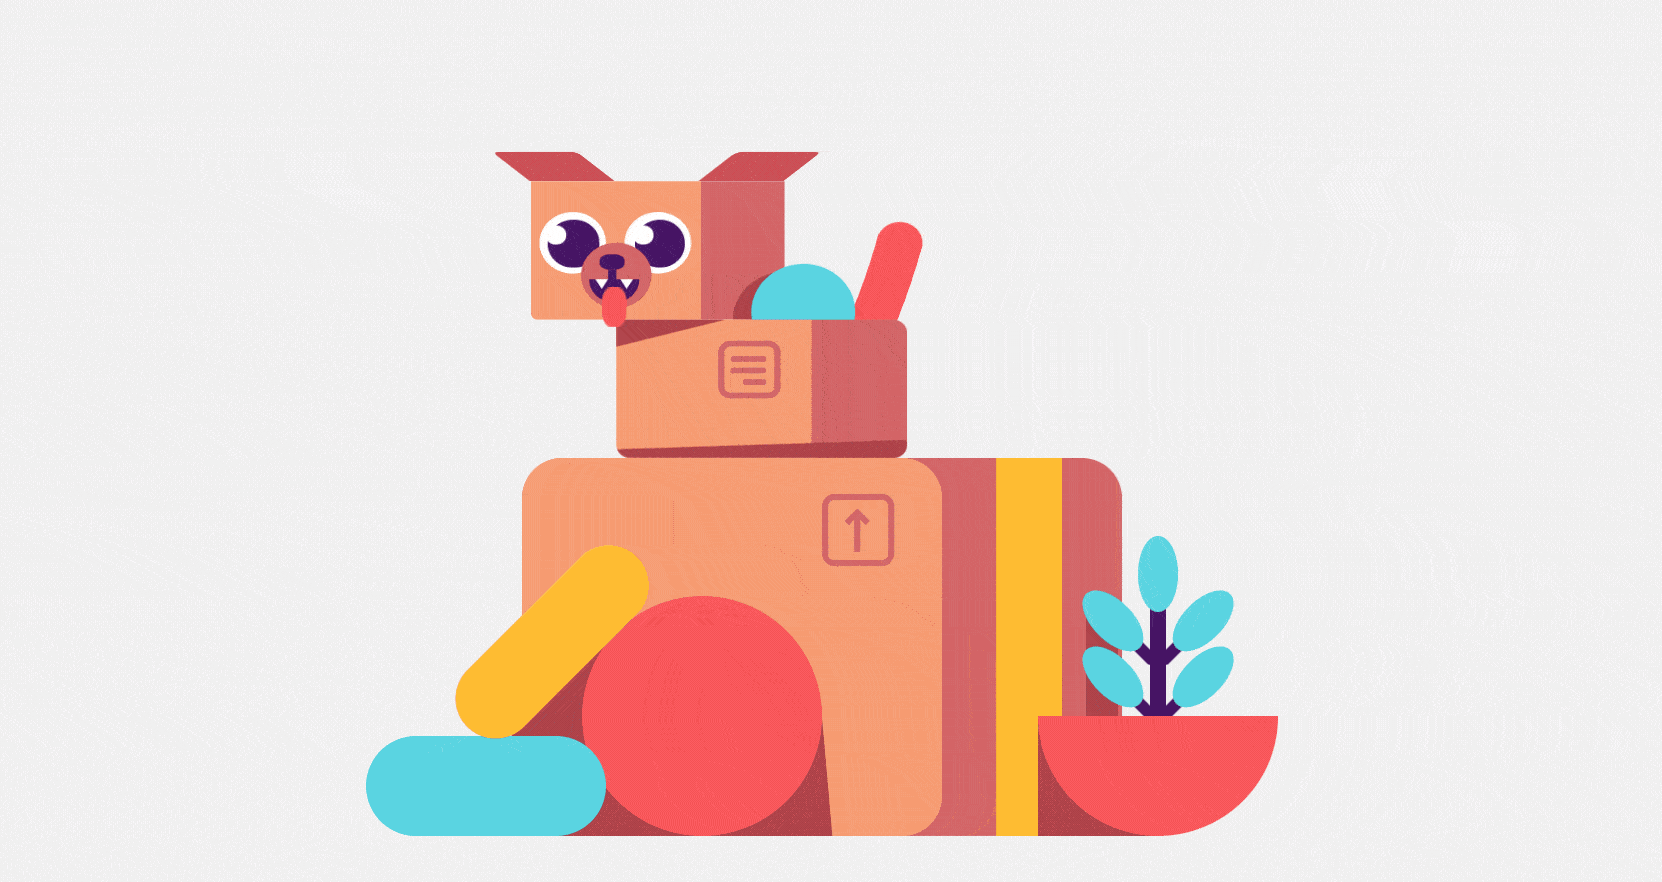 An amazing CSS Box Dog animation created in pure CSS by the very talented Agathe Cocco